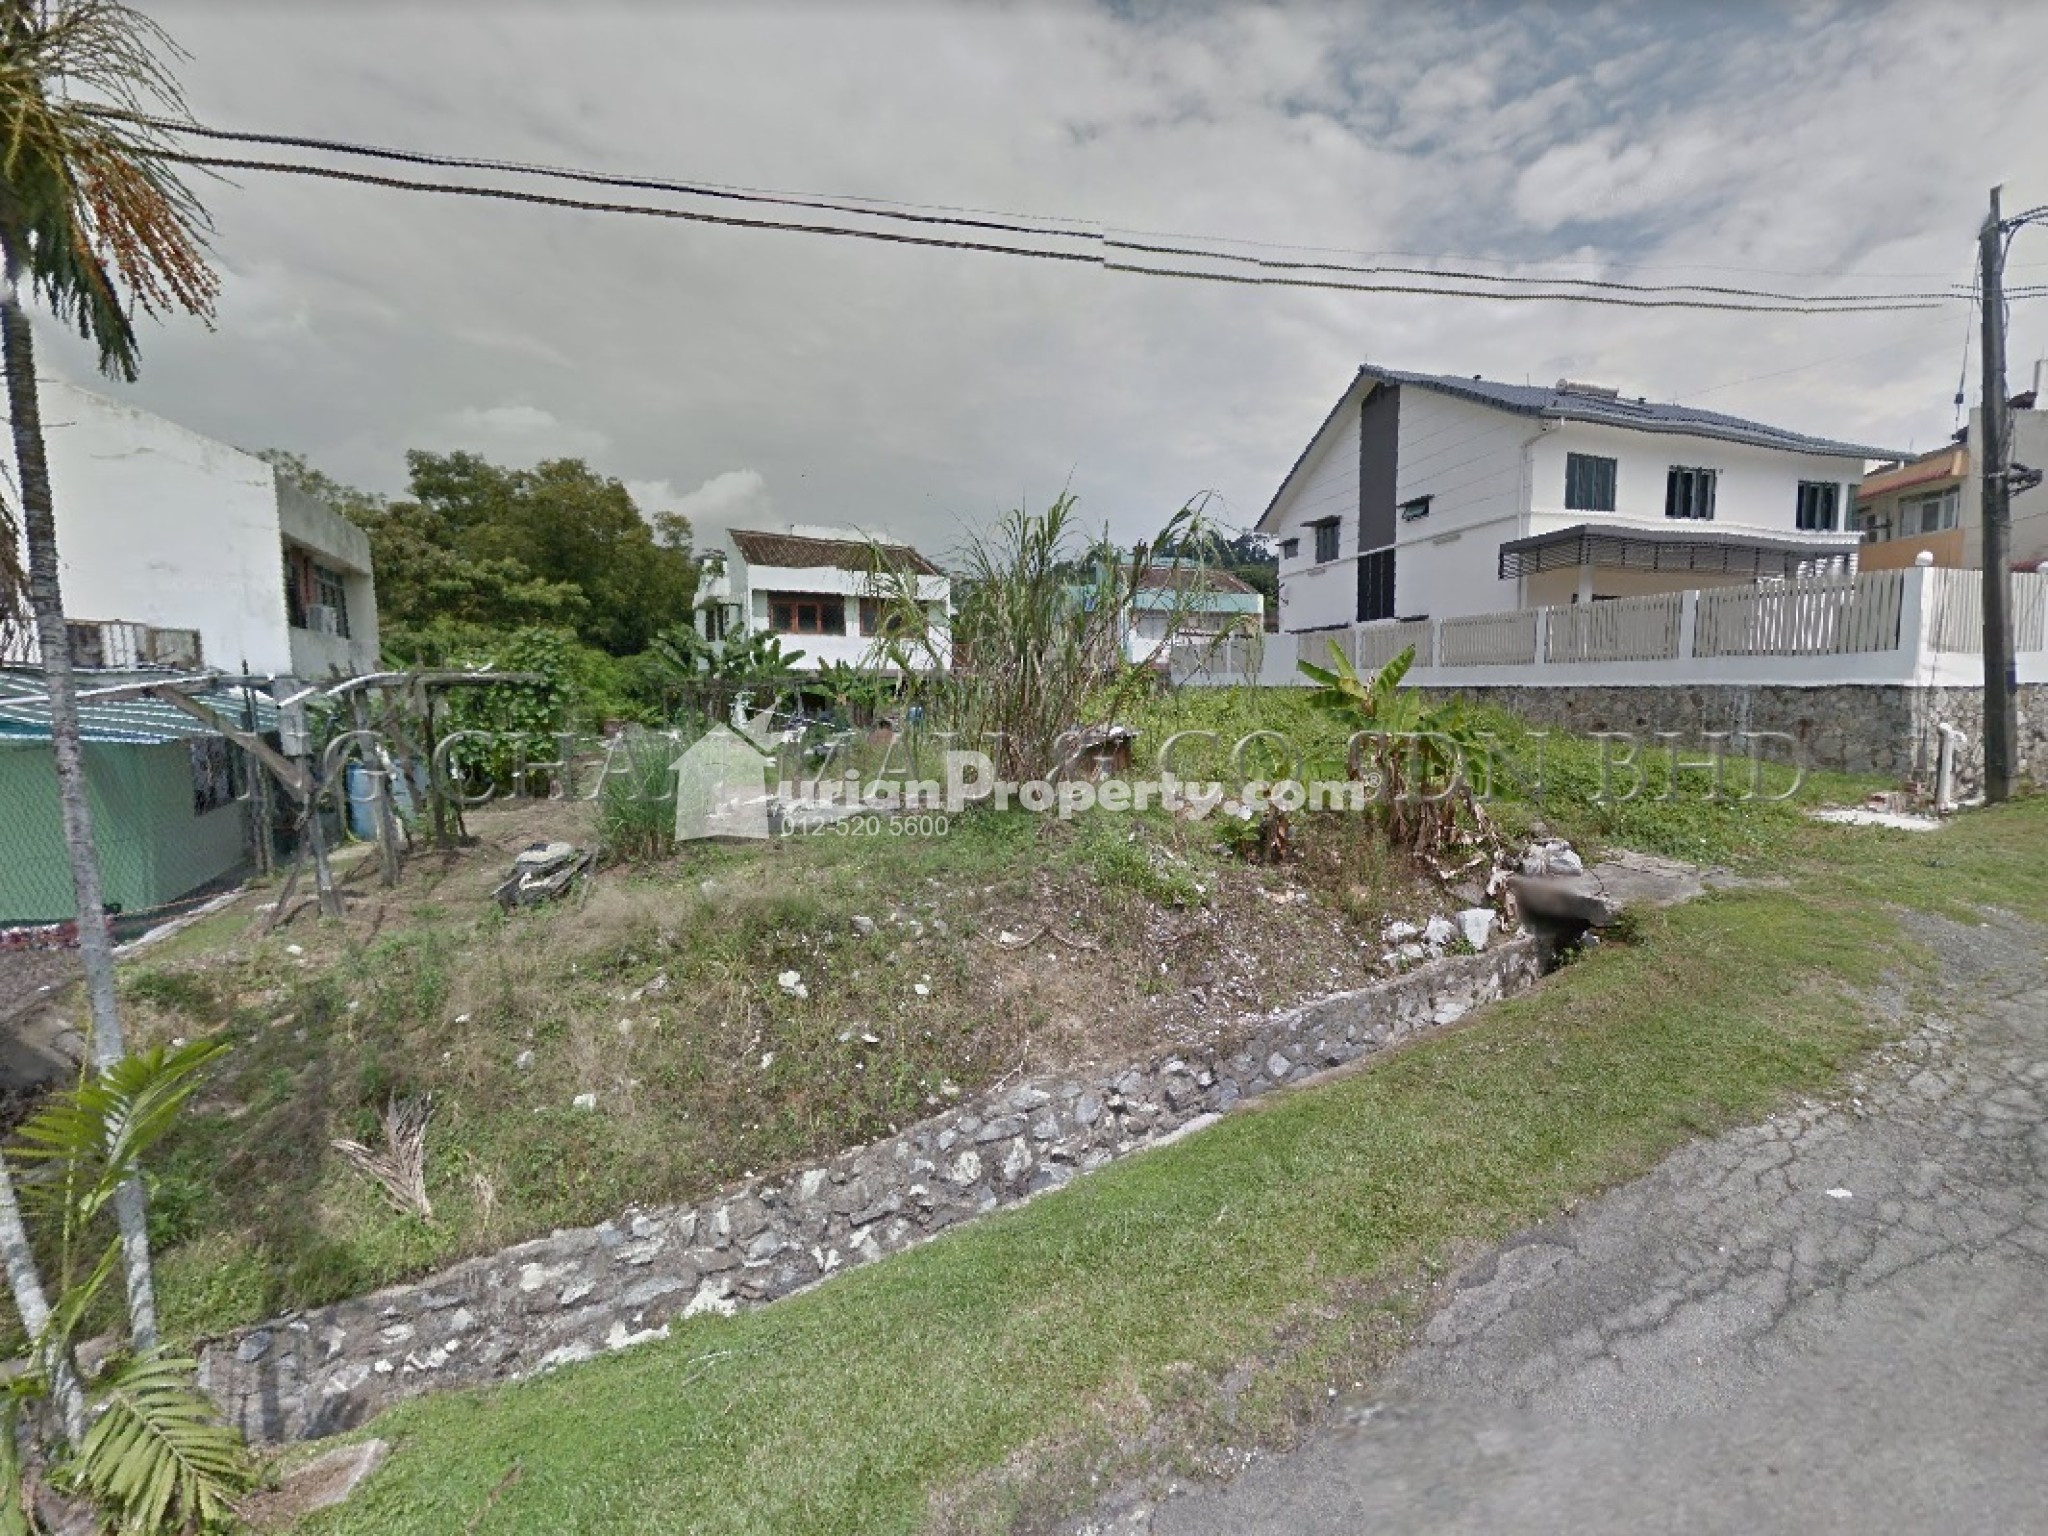 Residential Land For Auction at Taman Ferngrove